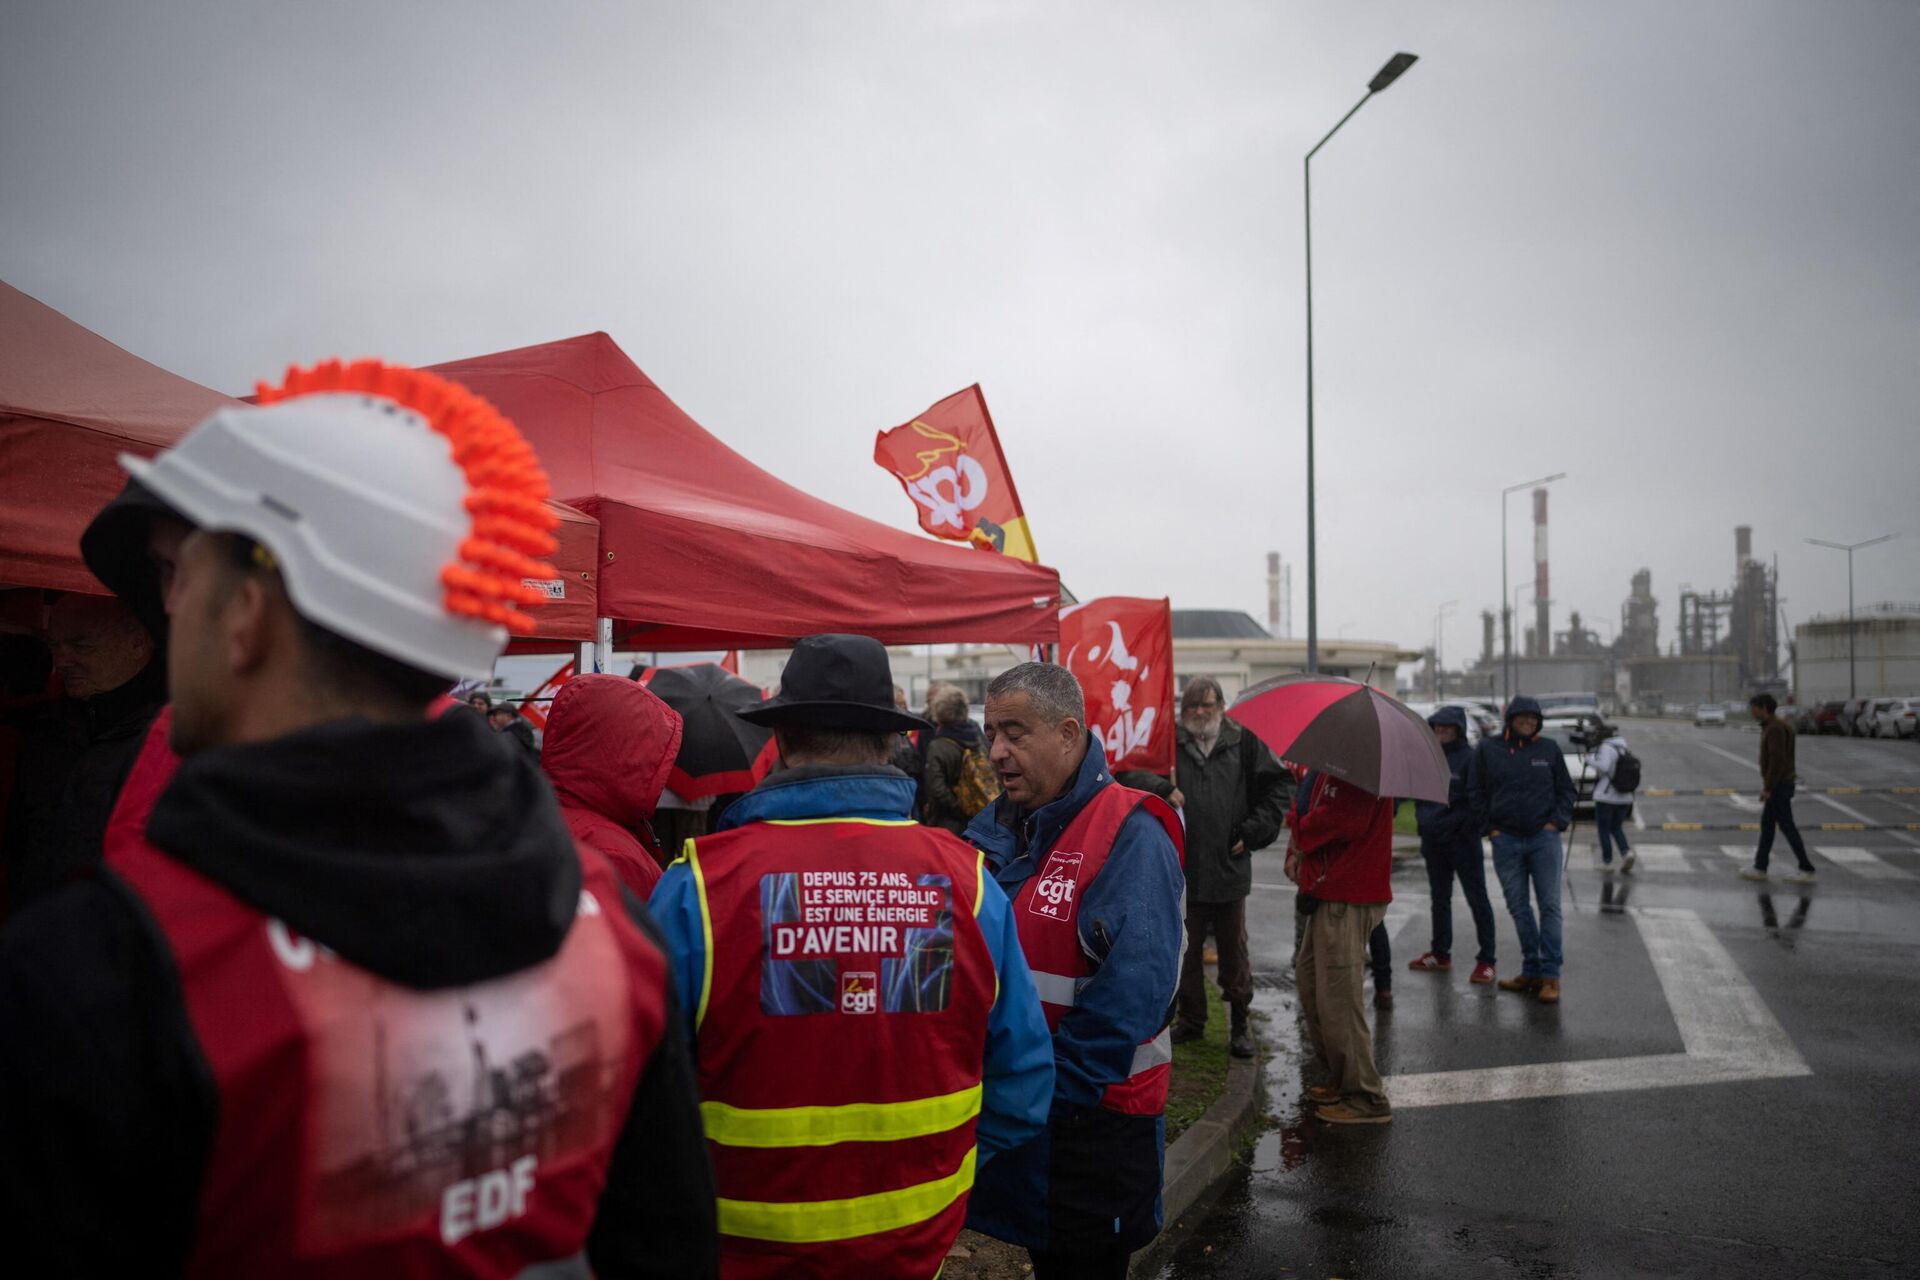 Trade unionists and striking employees gather outside the TotalEnergies refinery site, in Donges, western France, on October 14, 2022. - Sputnik International, 1920, 14.10.2022